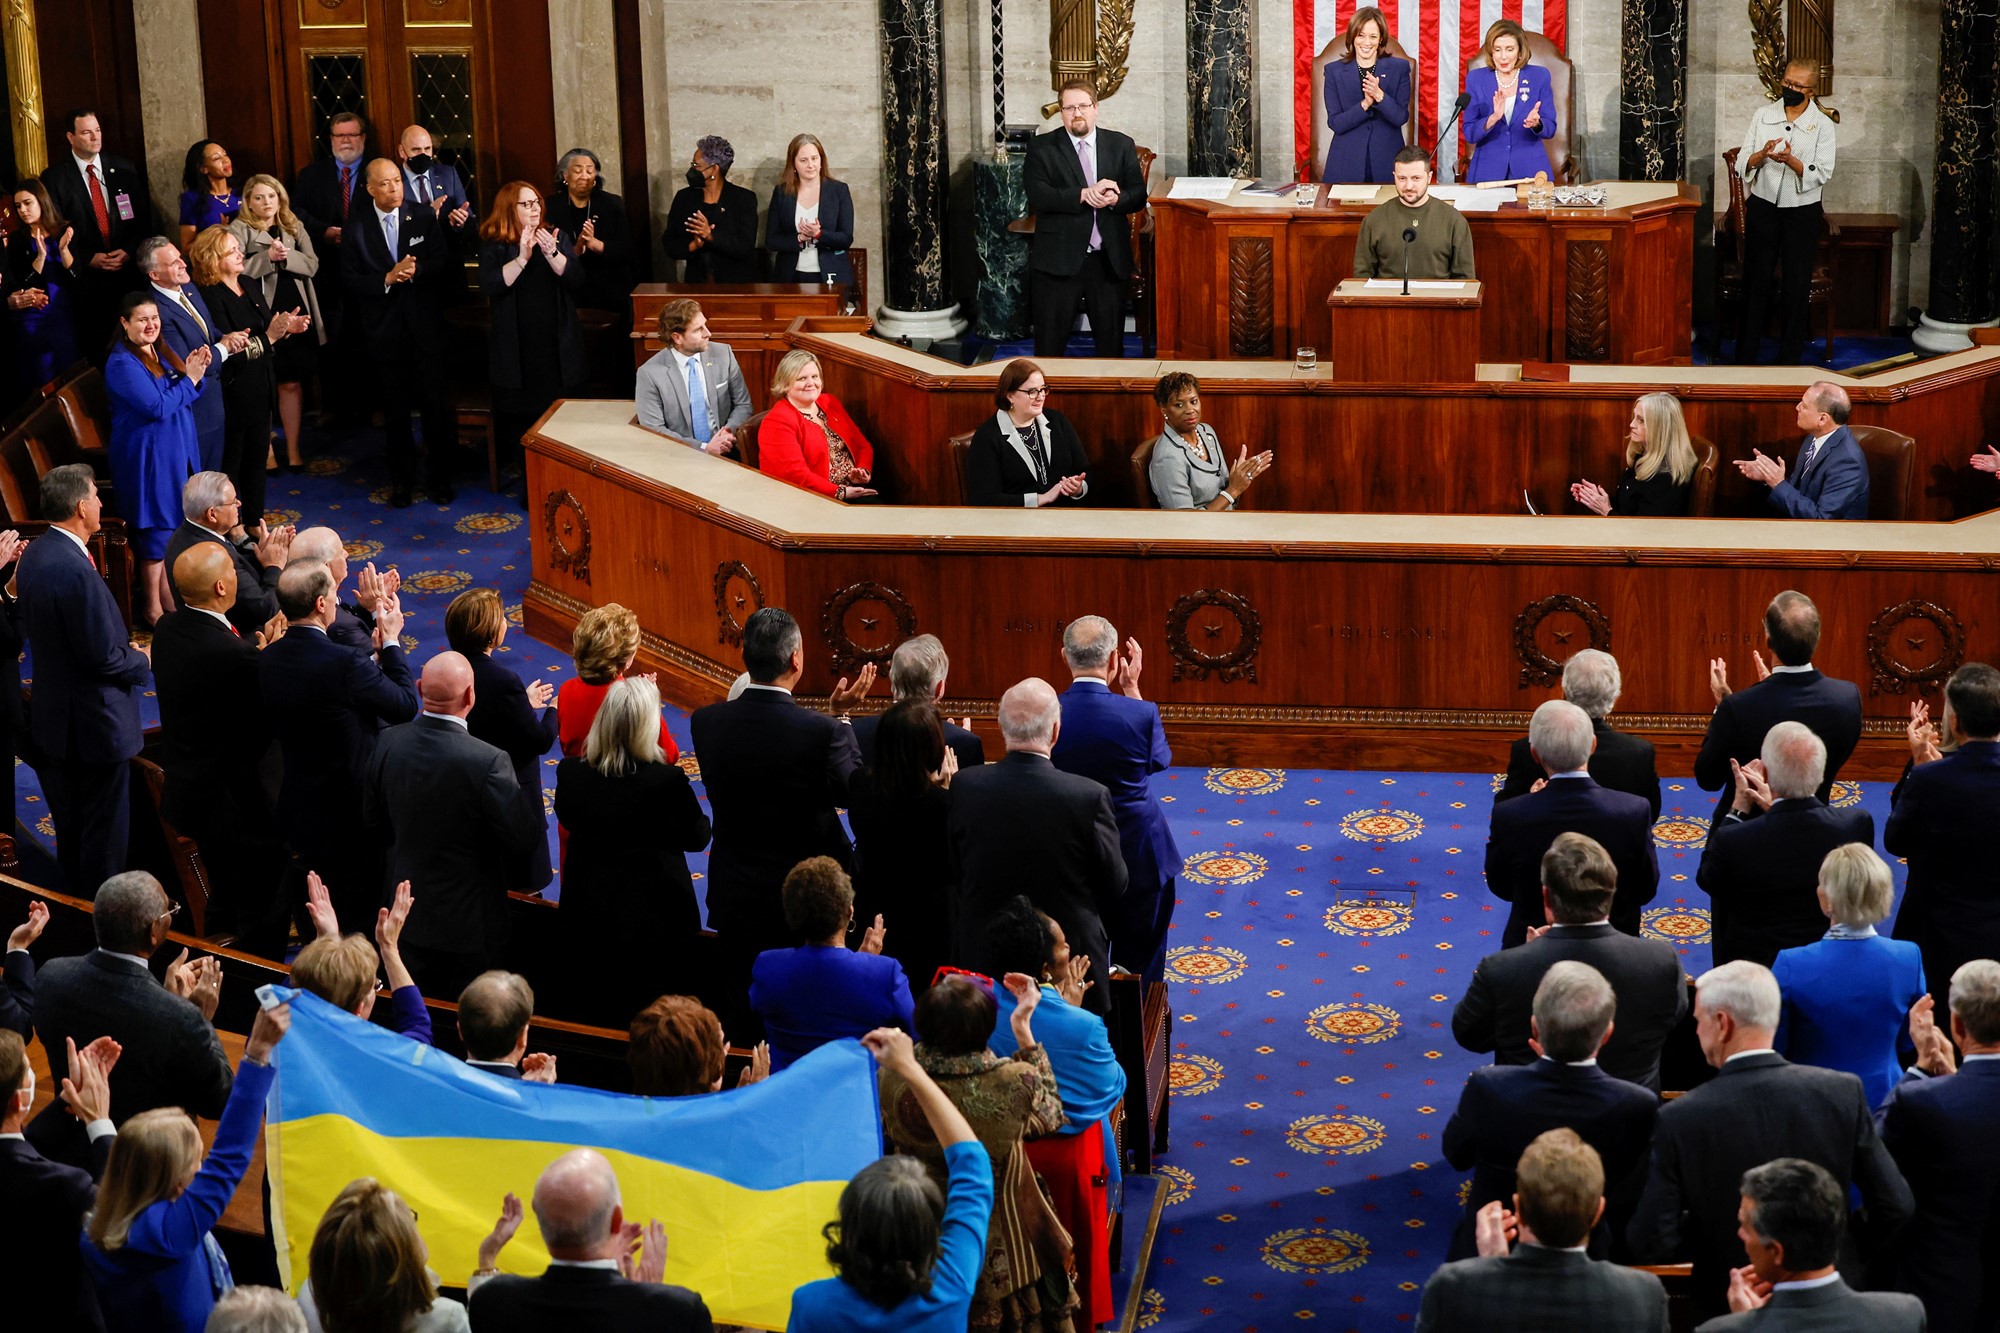 Ukraine's President Volodymyr Zelenskiy addresses a joint meeting of U.S. Congress at the U.S. Capitol in Washington